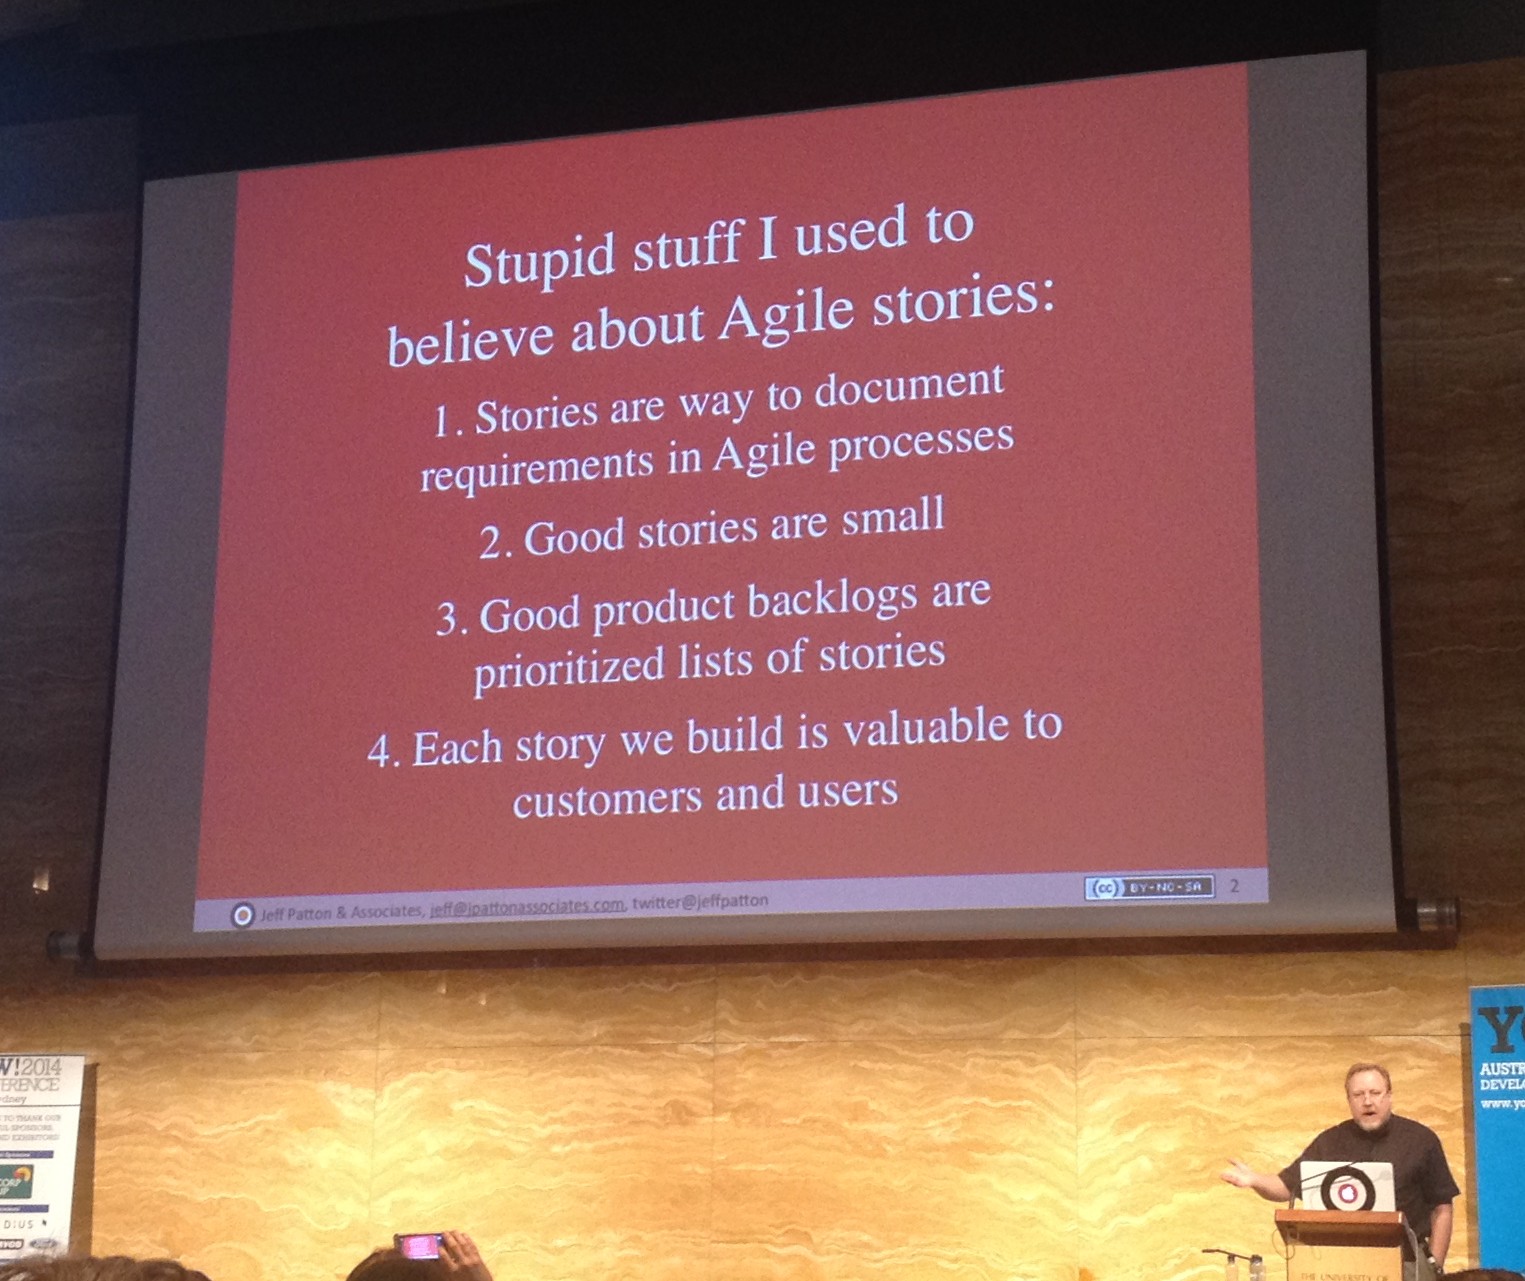 Stupid stuff Jeff Patton used to belive about Agile stories